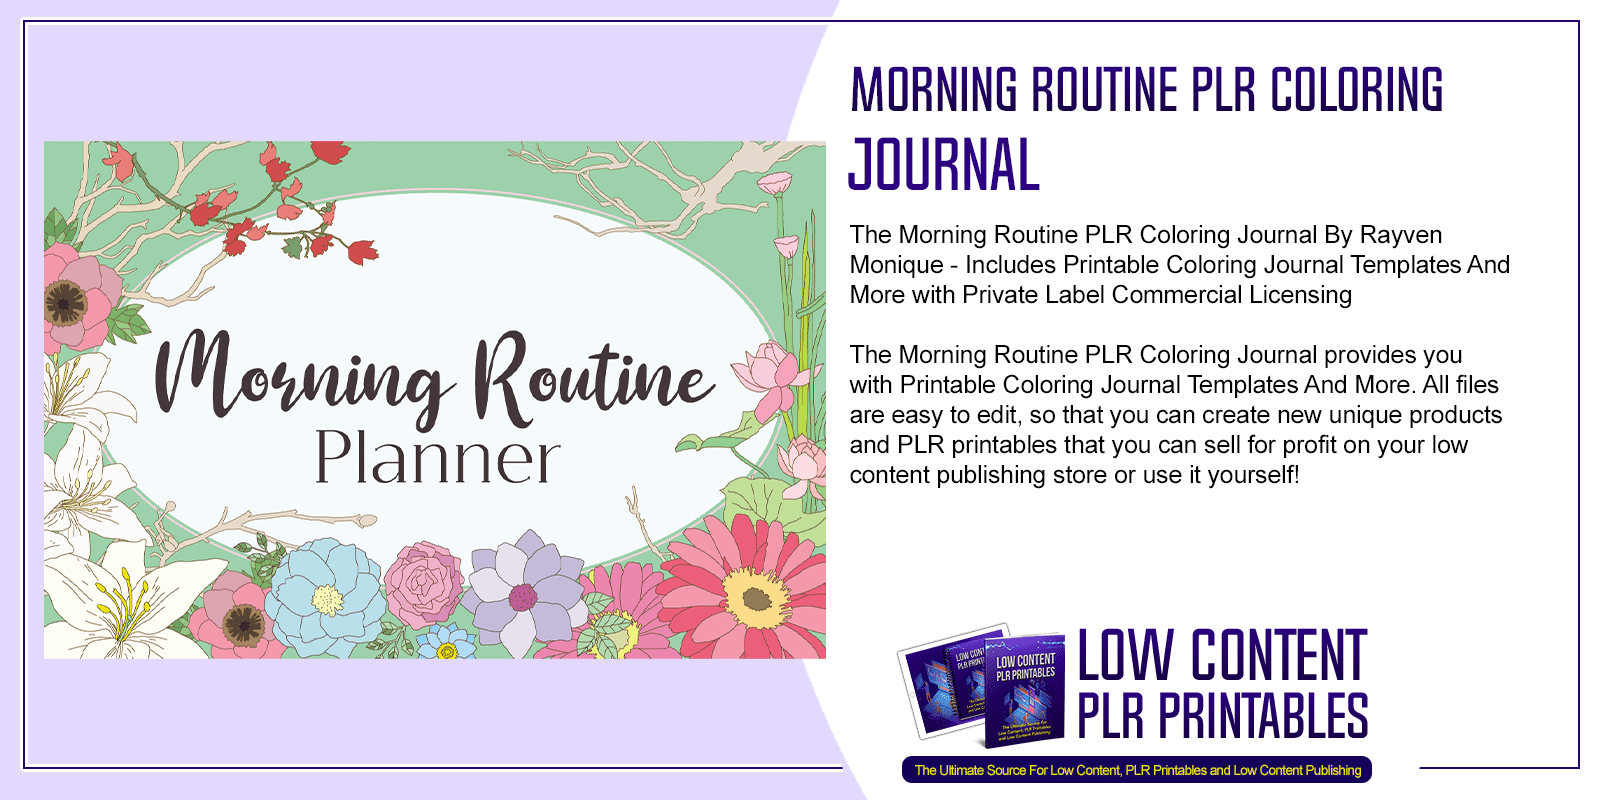 Morning Routine PLR Coloring Journal